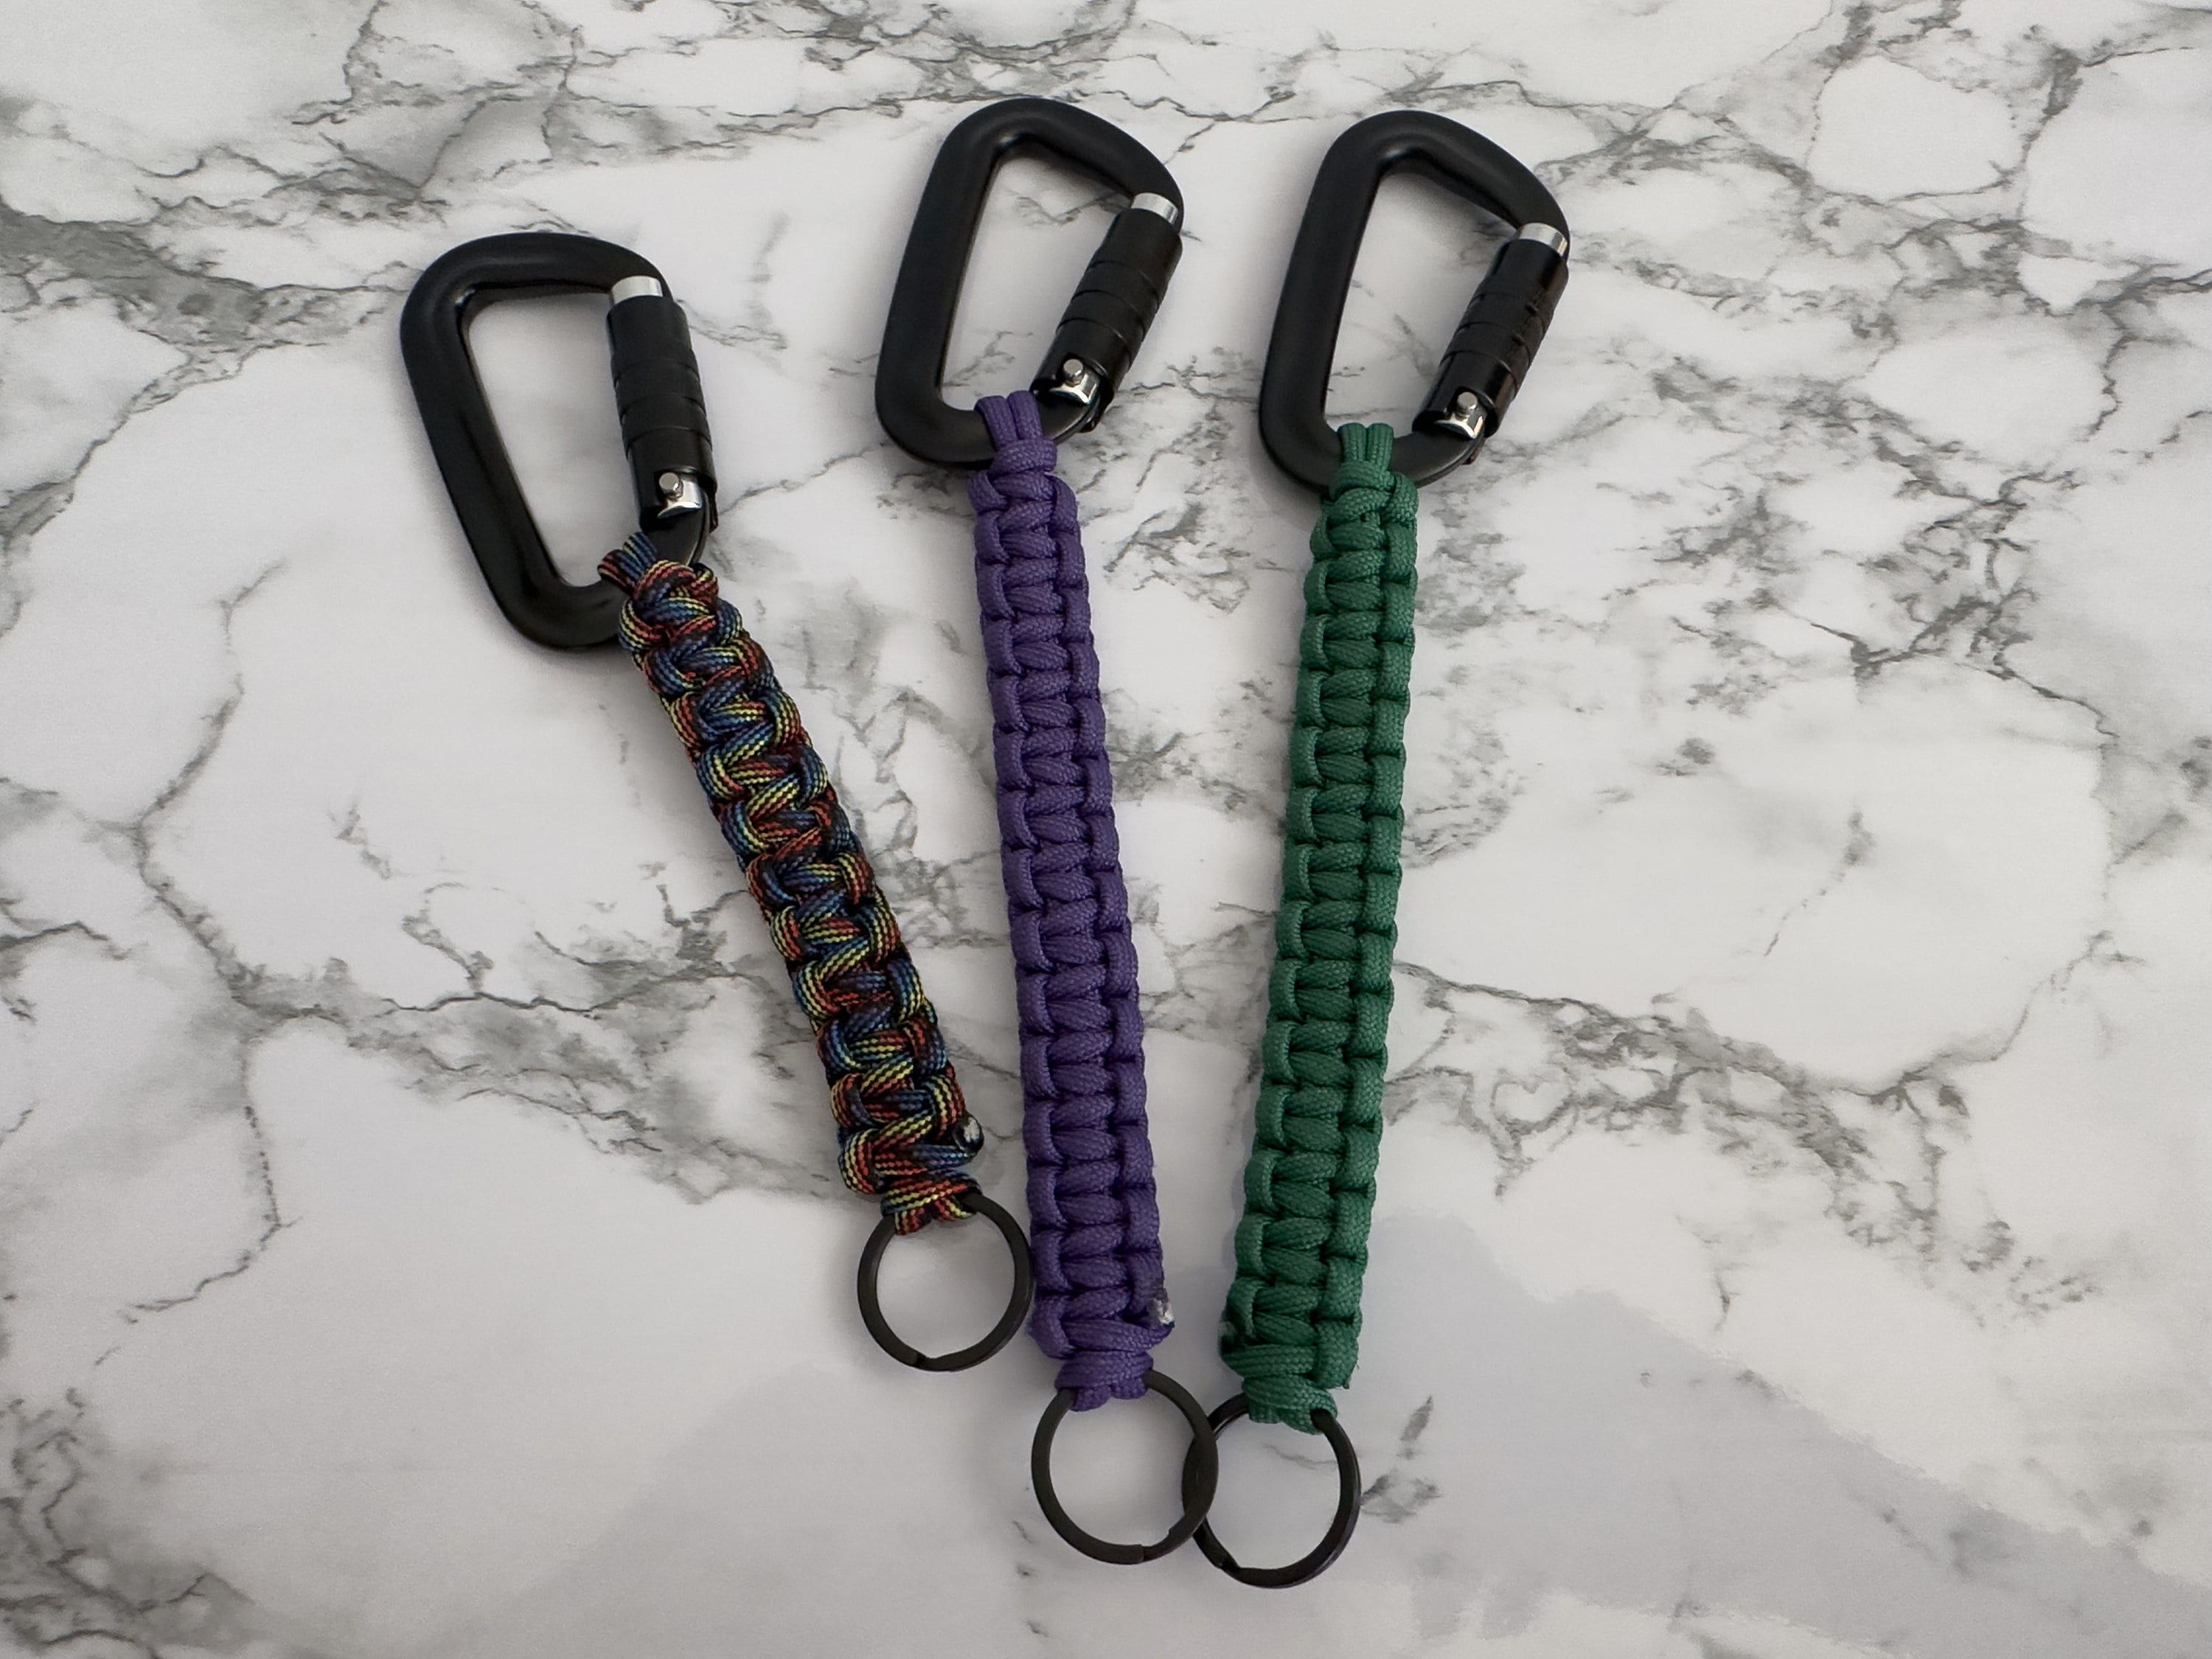 Pickleball Keychain - Paracord Lanyard with Carabiner & Ball - Heavy Duty -  Multifunctional - Clips Anywhere